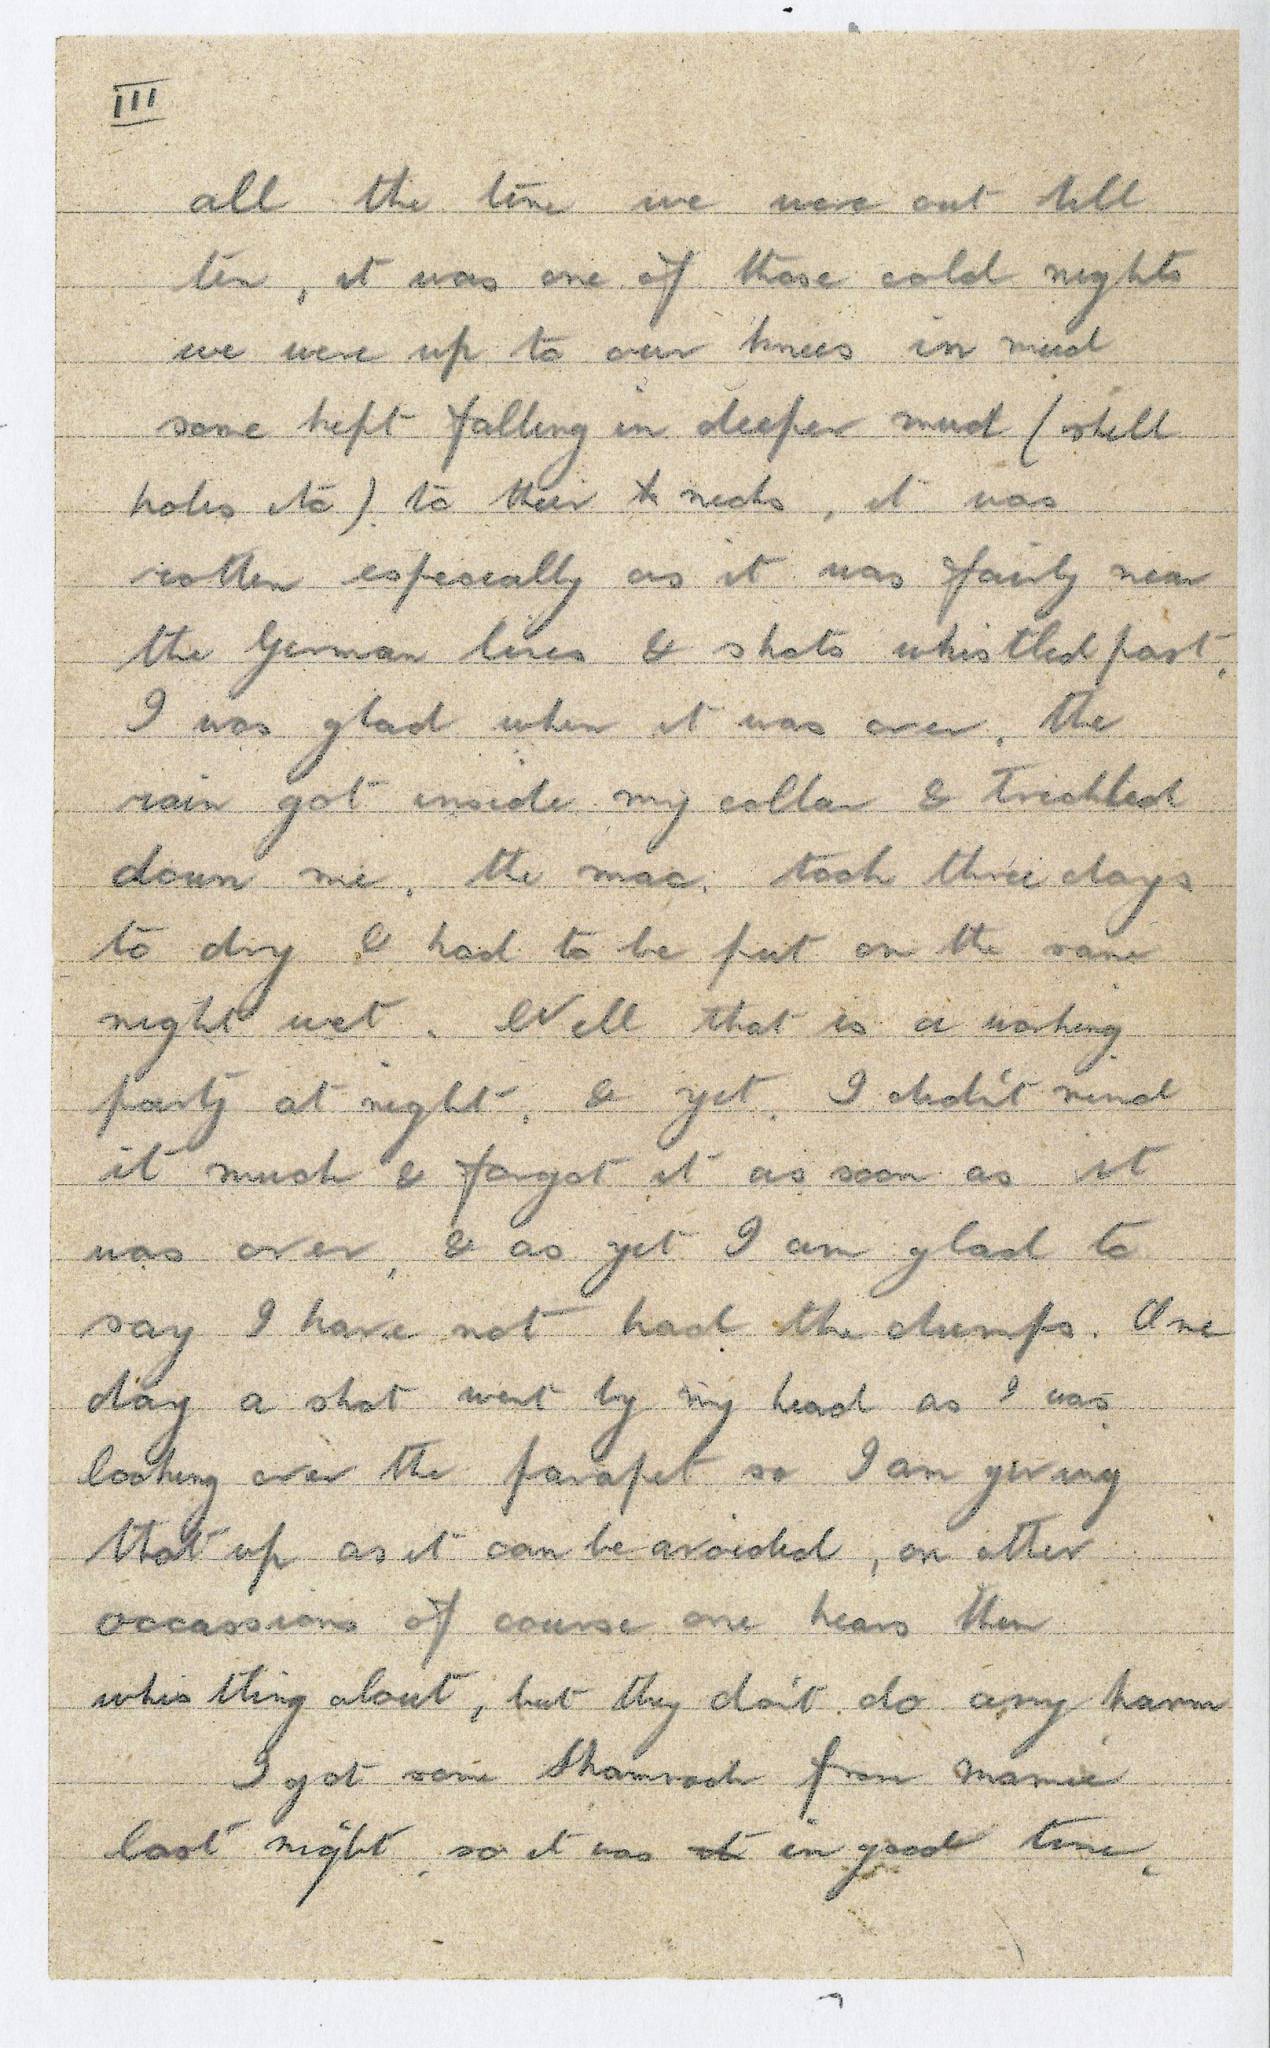 Styles AH letter 3 of 4. Photo courtesy of the Haines family archive.